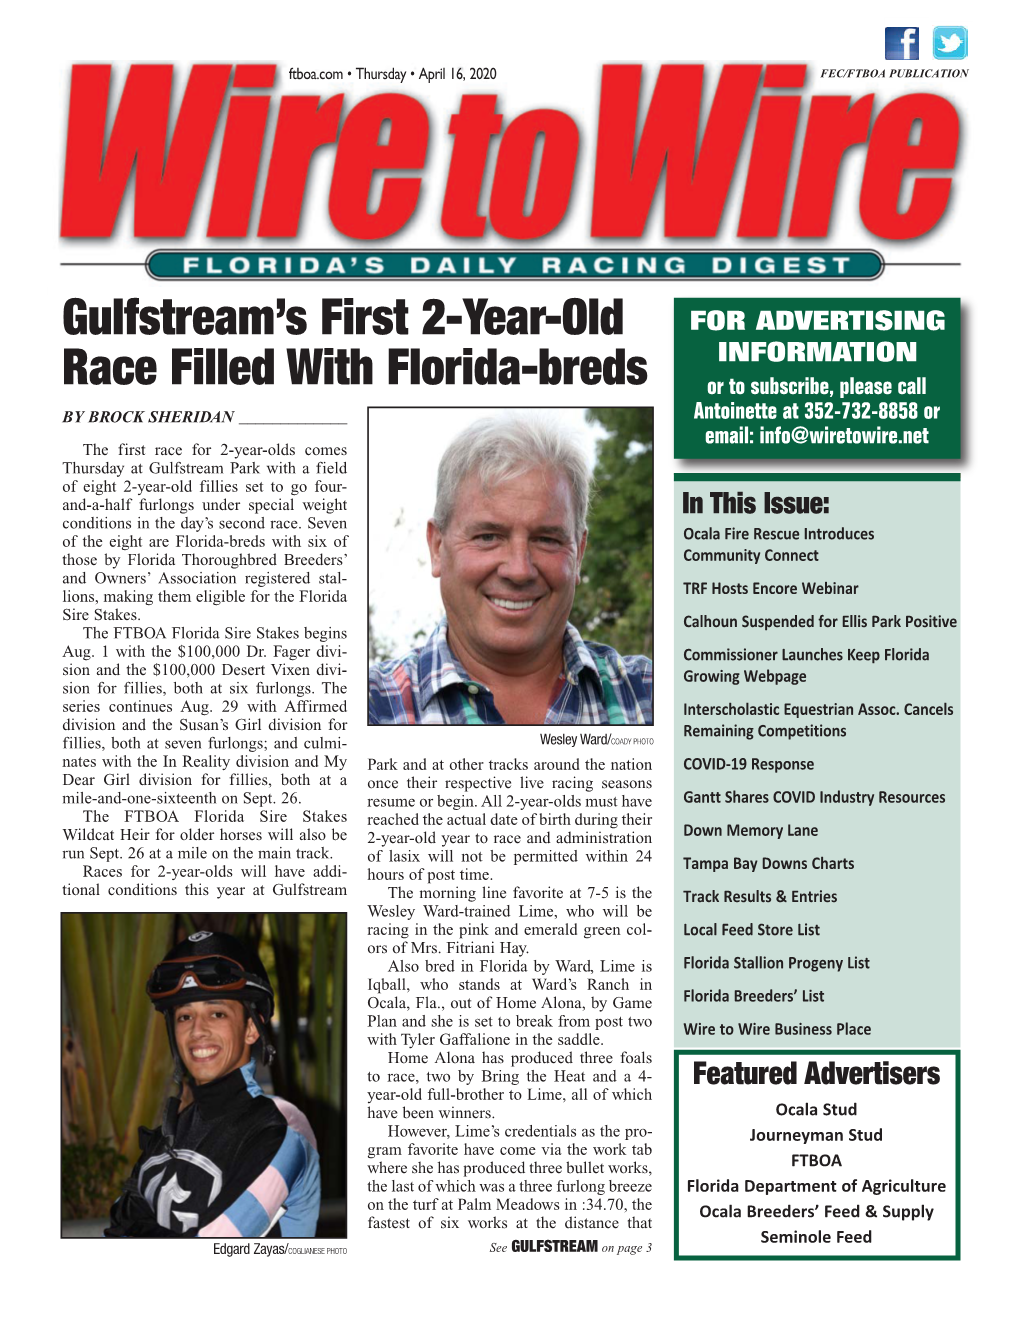 Gulfstream's First 2-Year-Old Race Filled with Florida-Breds